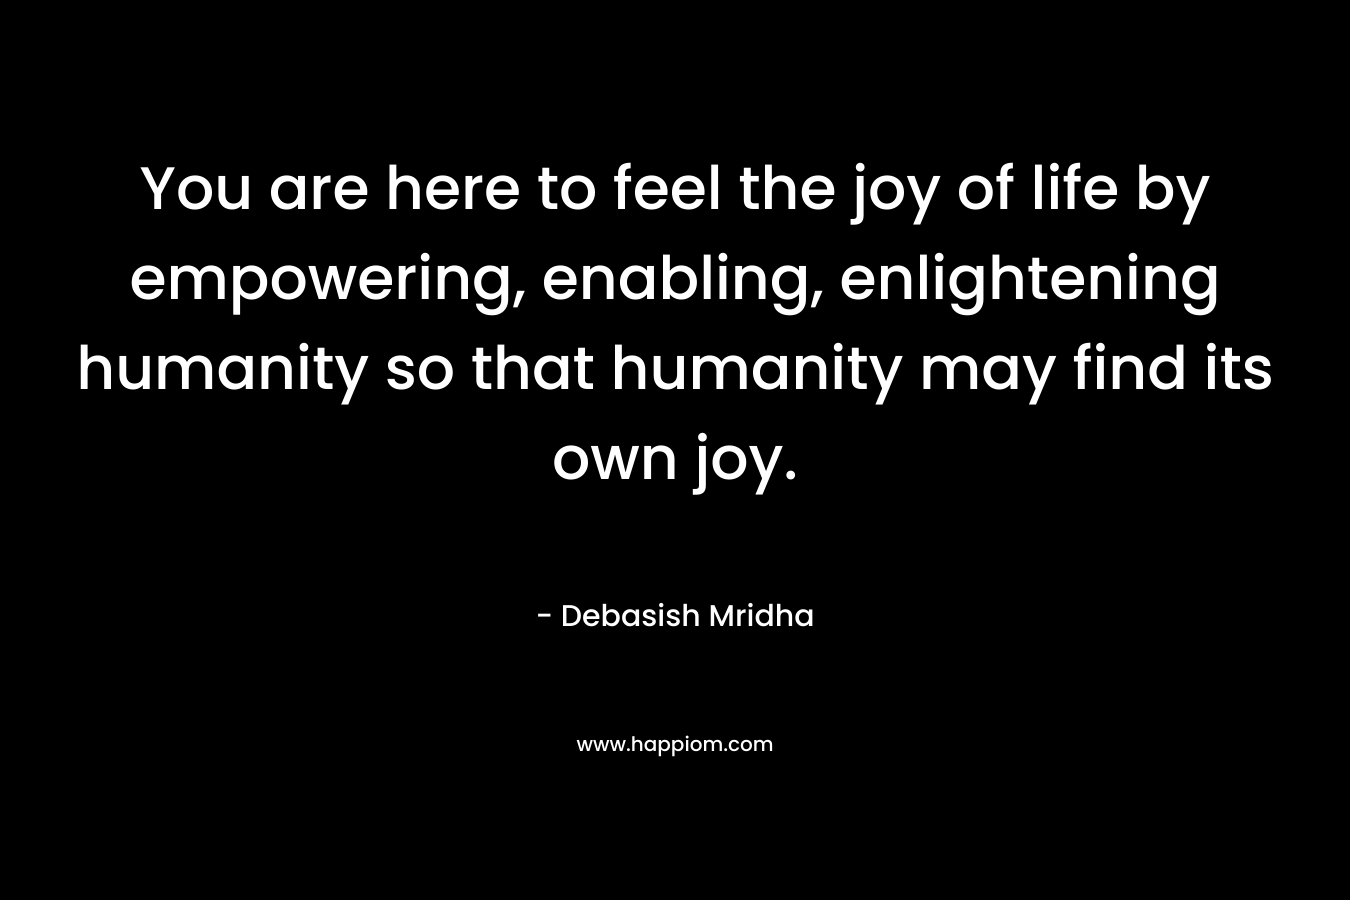 You are here to feel the joy of life by empowering, enabling, enlightening humanity so that humanity may find its own joy.